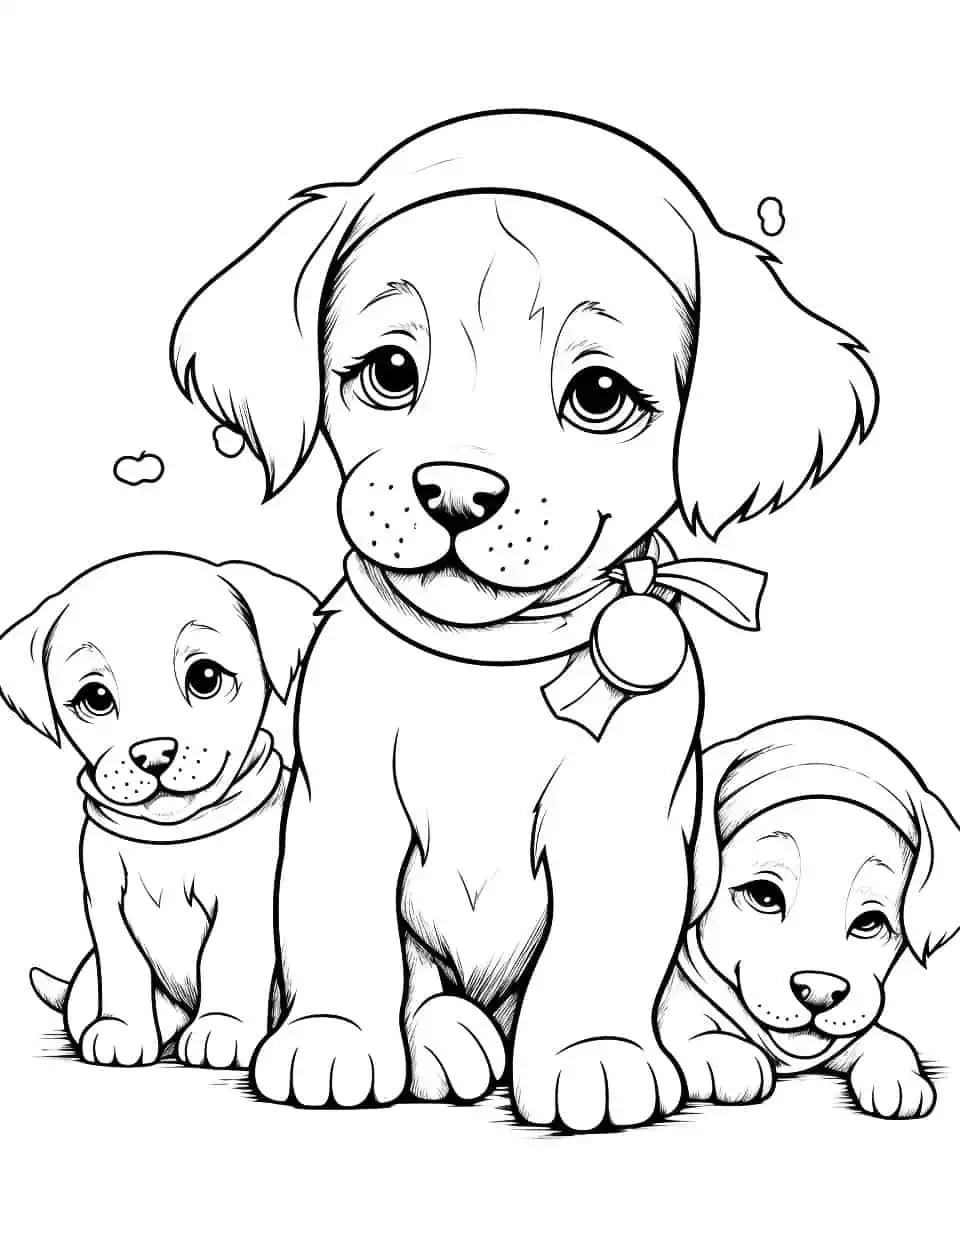 Cute Christmas Puppies Dog Coloring Page - Several puppies wearing Christmas costumes and playing with Christmas decorations.